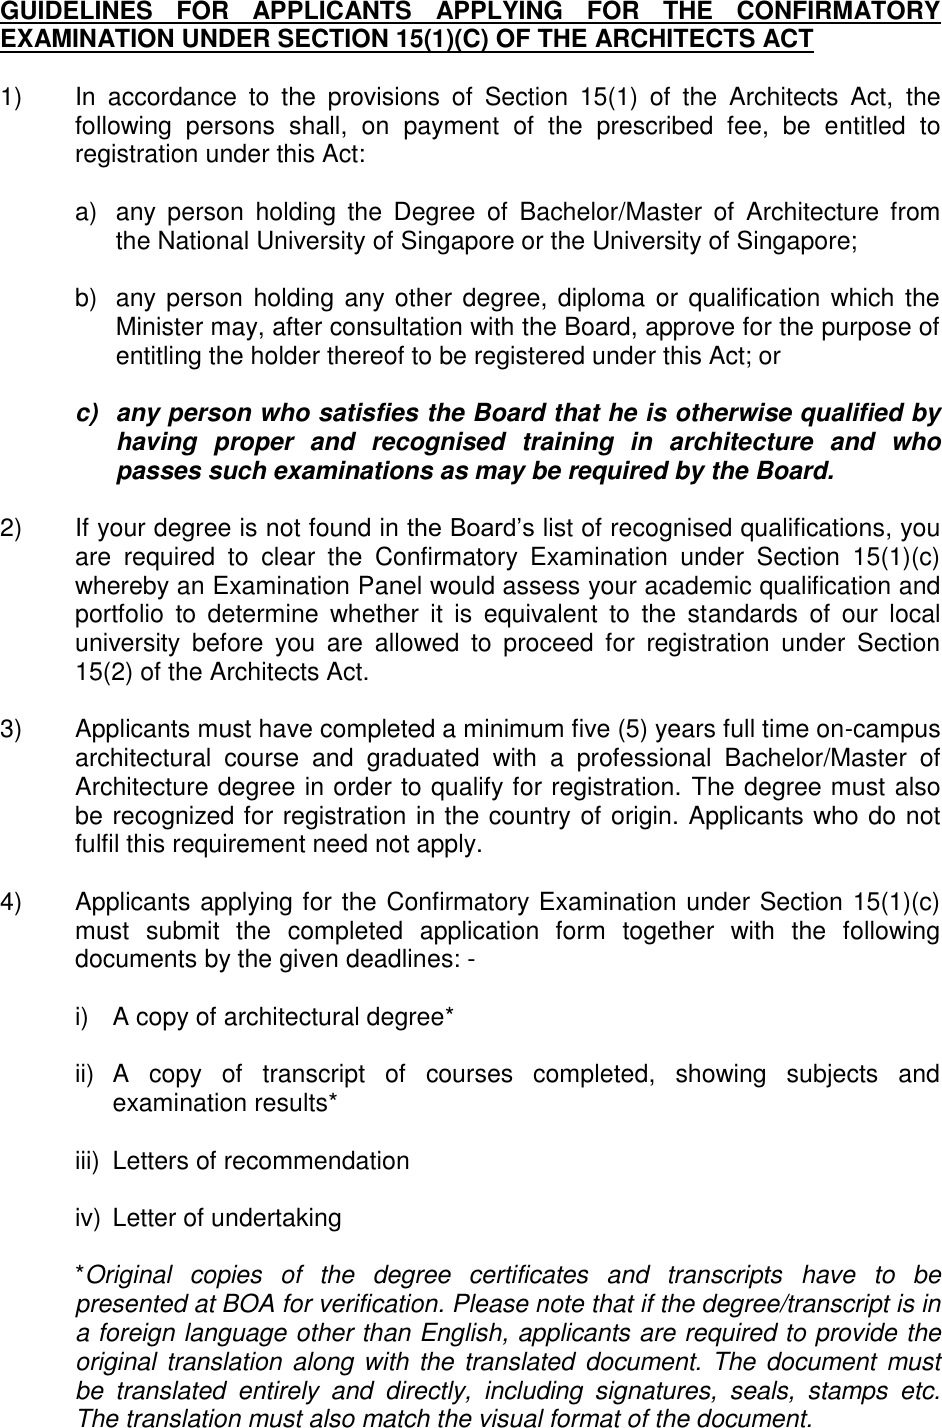 Page 1 of 4 - GUIDELINES FOR APPLICANTS APPLYING UNDER SECTION 15(C) OF THE ARCHITECTS ACT Guide 15 1 C